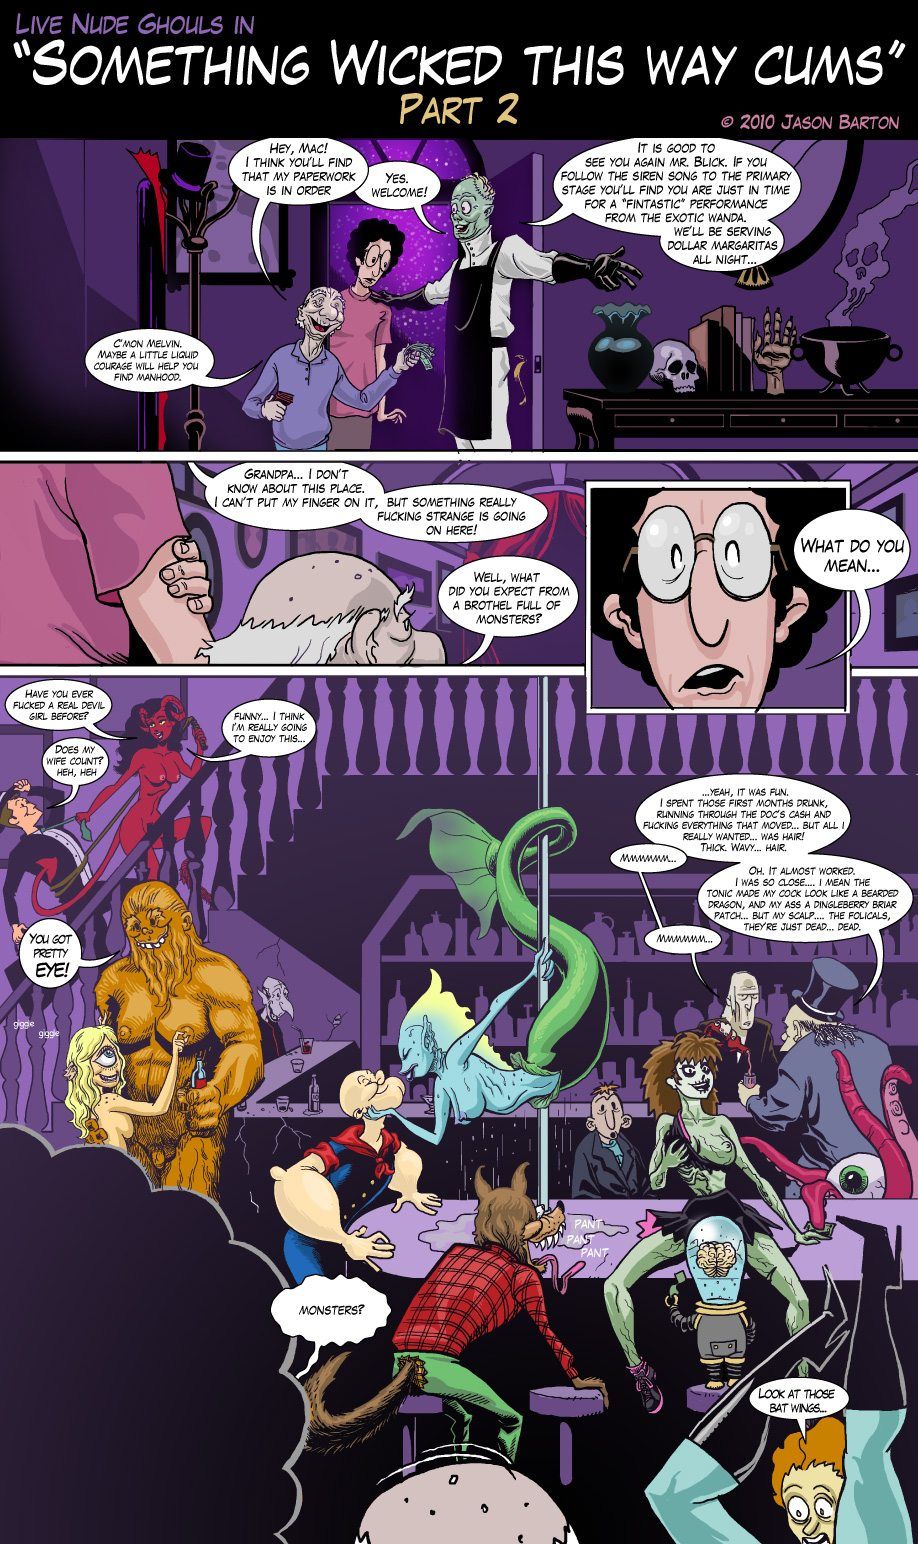 Live Nude Ghouls Something Wicked page 2